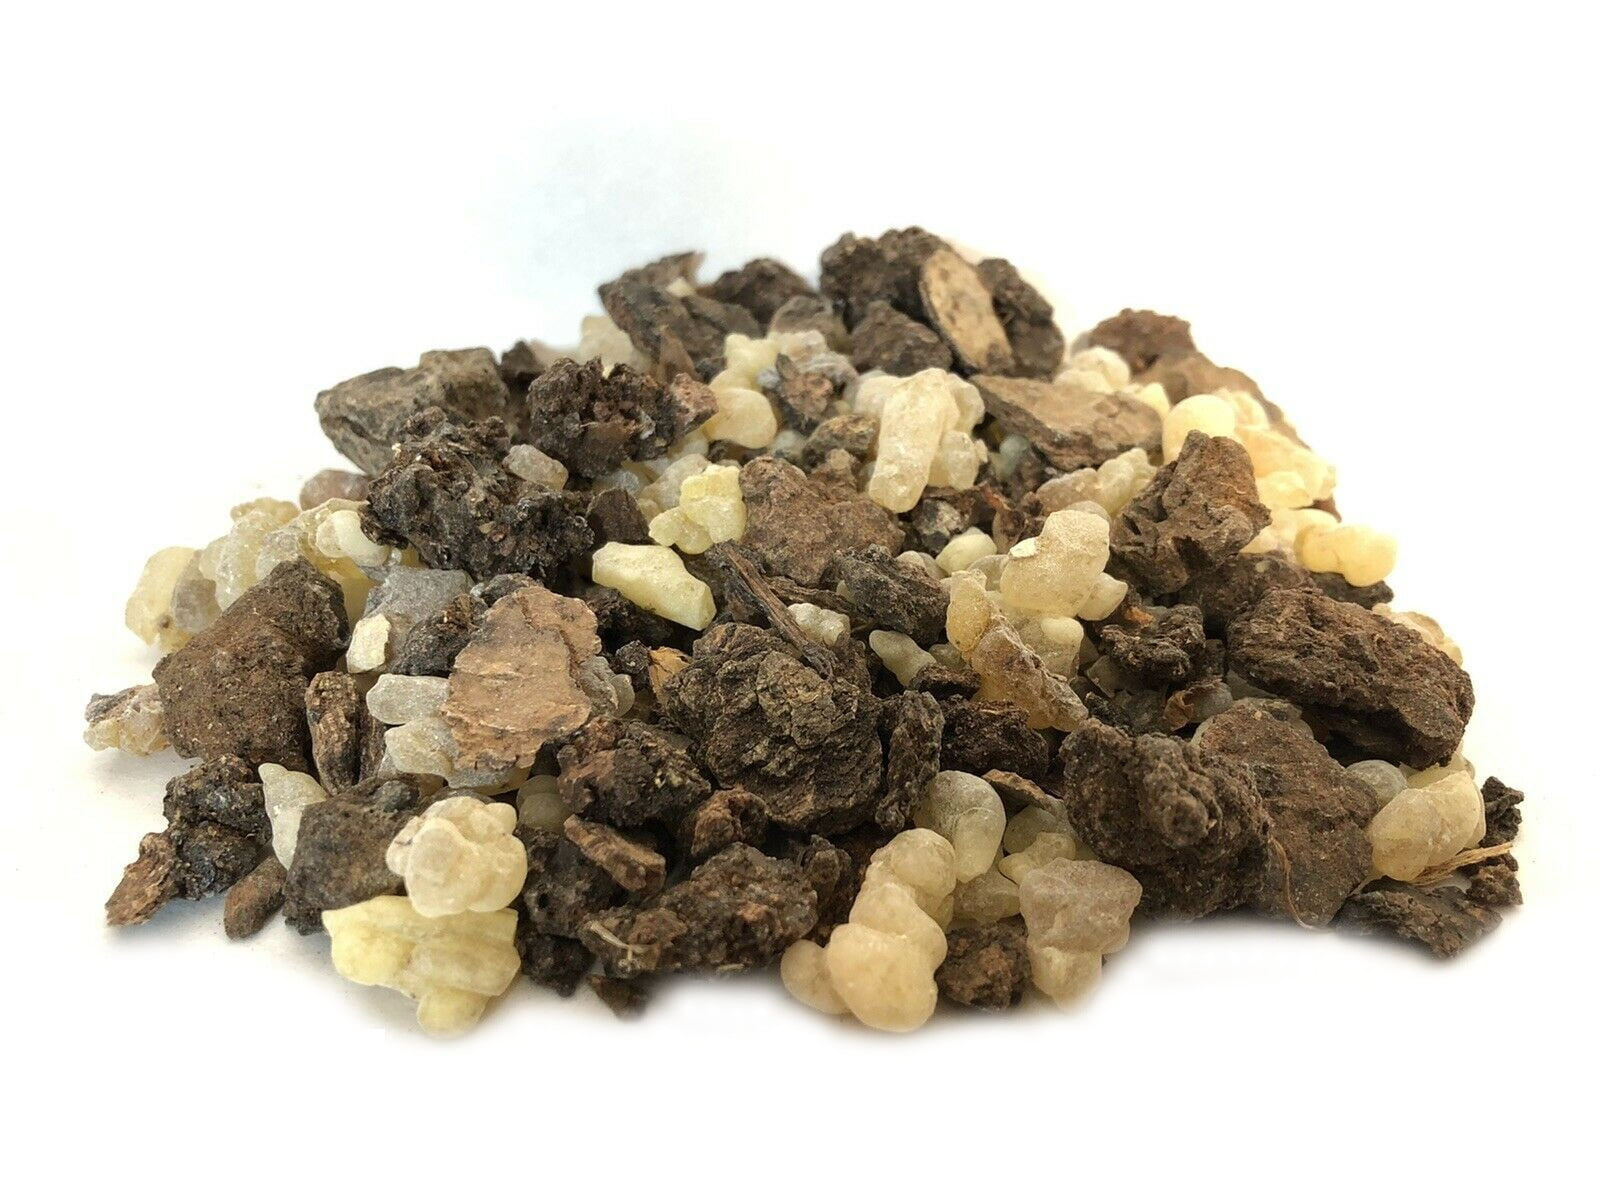 Natural Frankincense and Myrrh Mix Resin Pure resin Incense Bulk Lot  Frankincense with Myrrh Granular Resin classic aroma - AliExpress